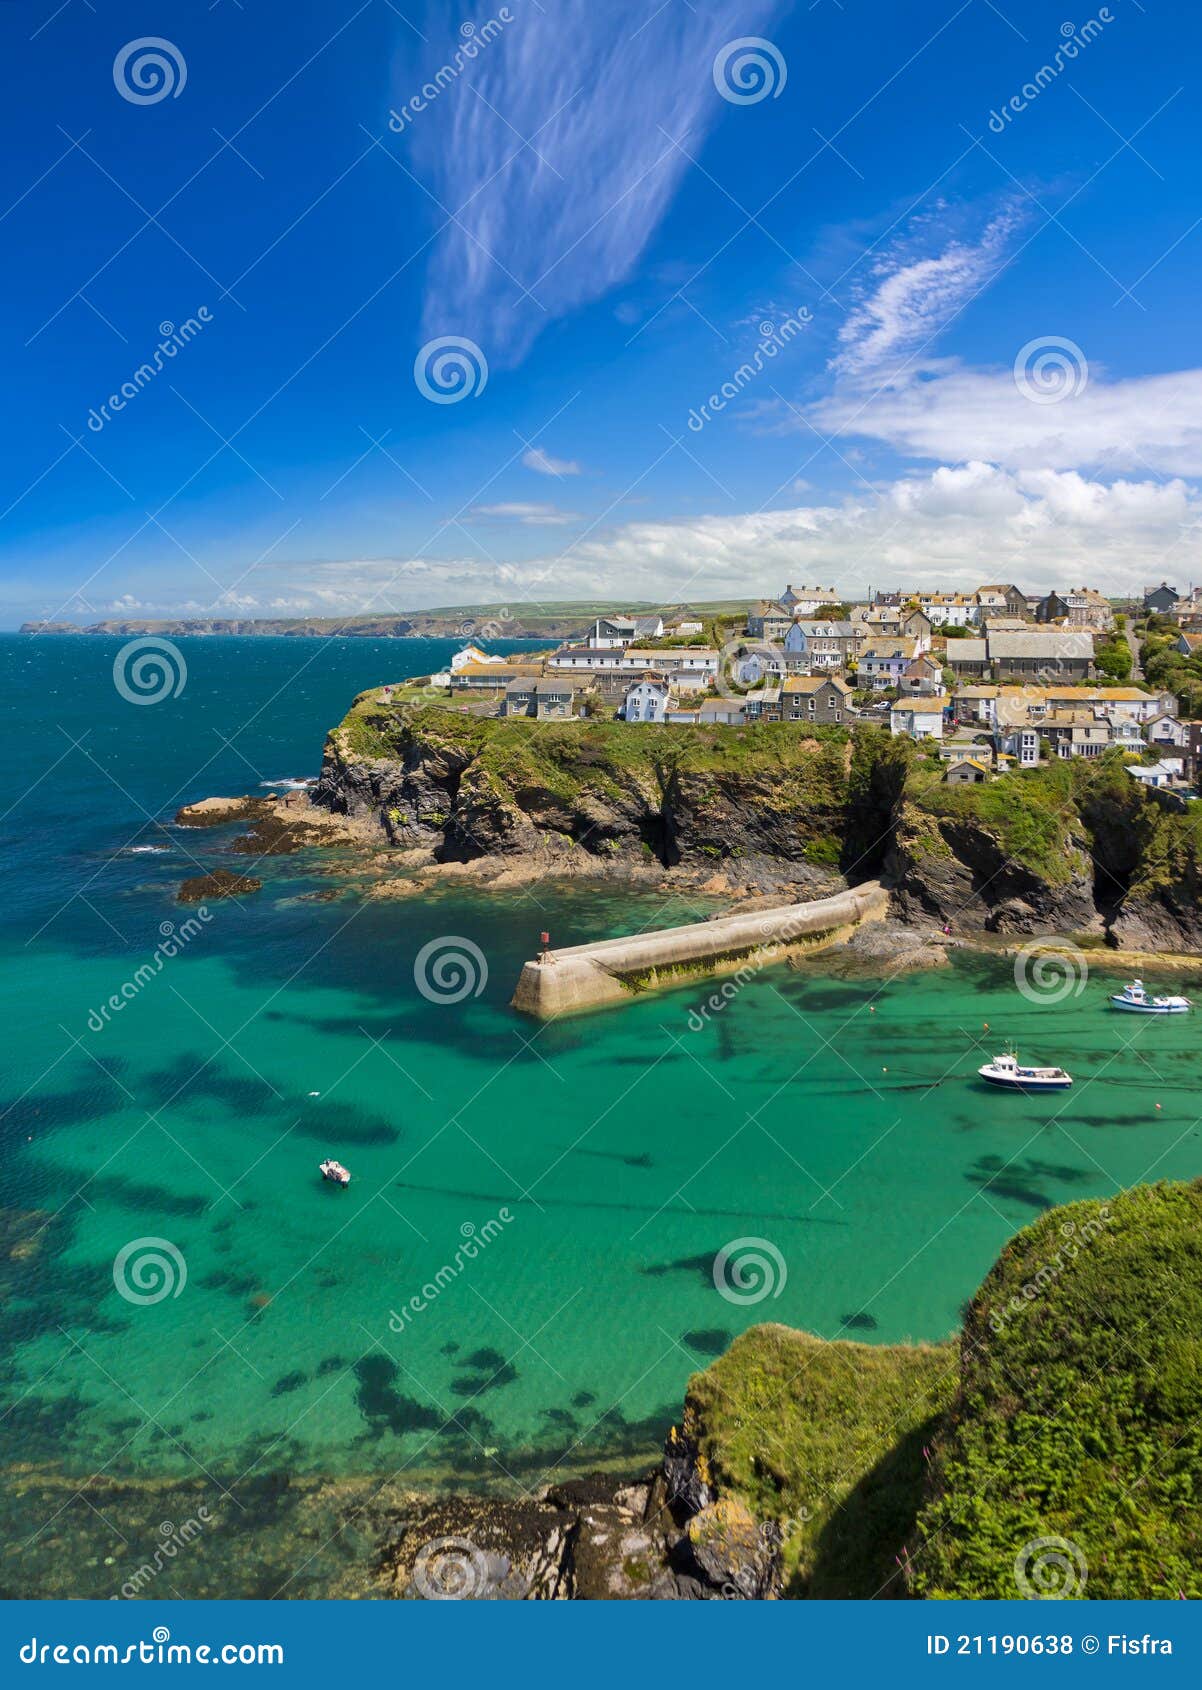 cove and harbour of port isaac, cornwall, uk